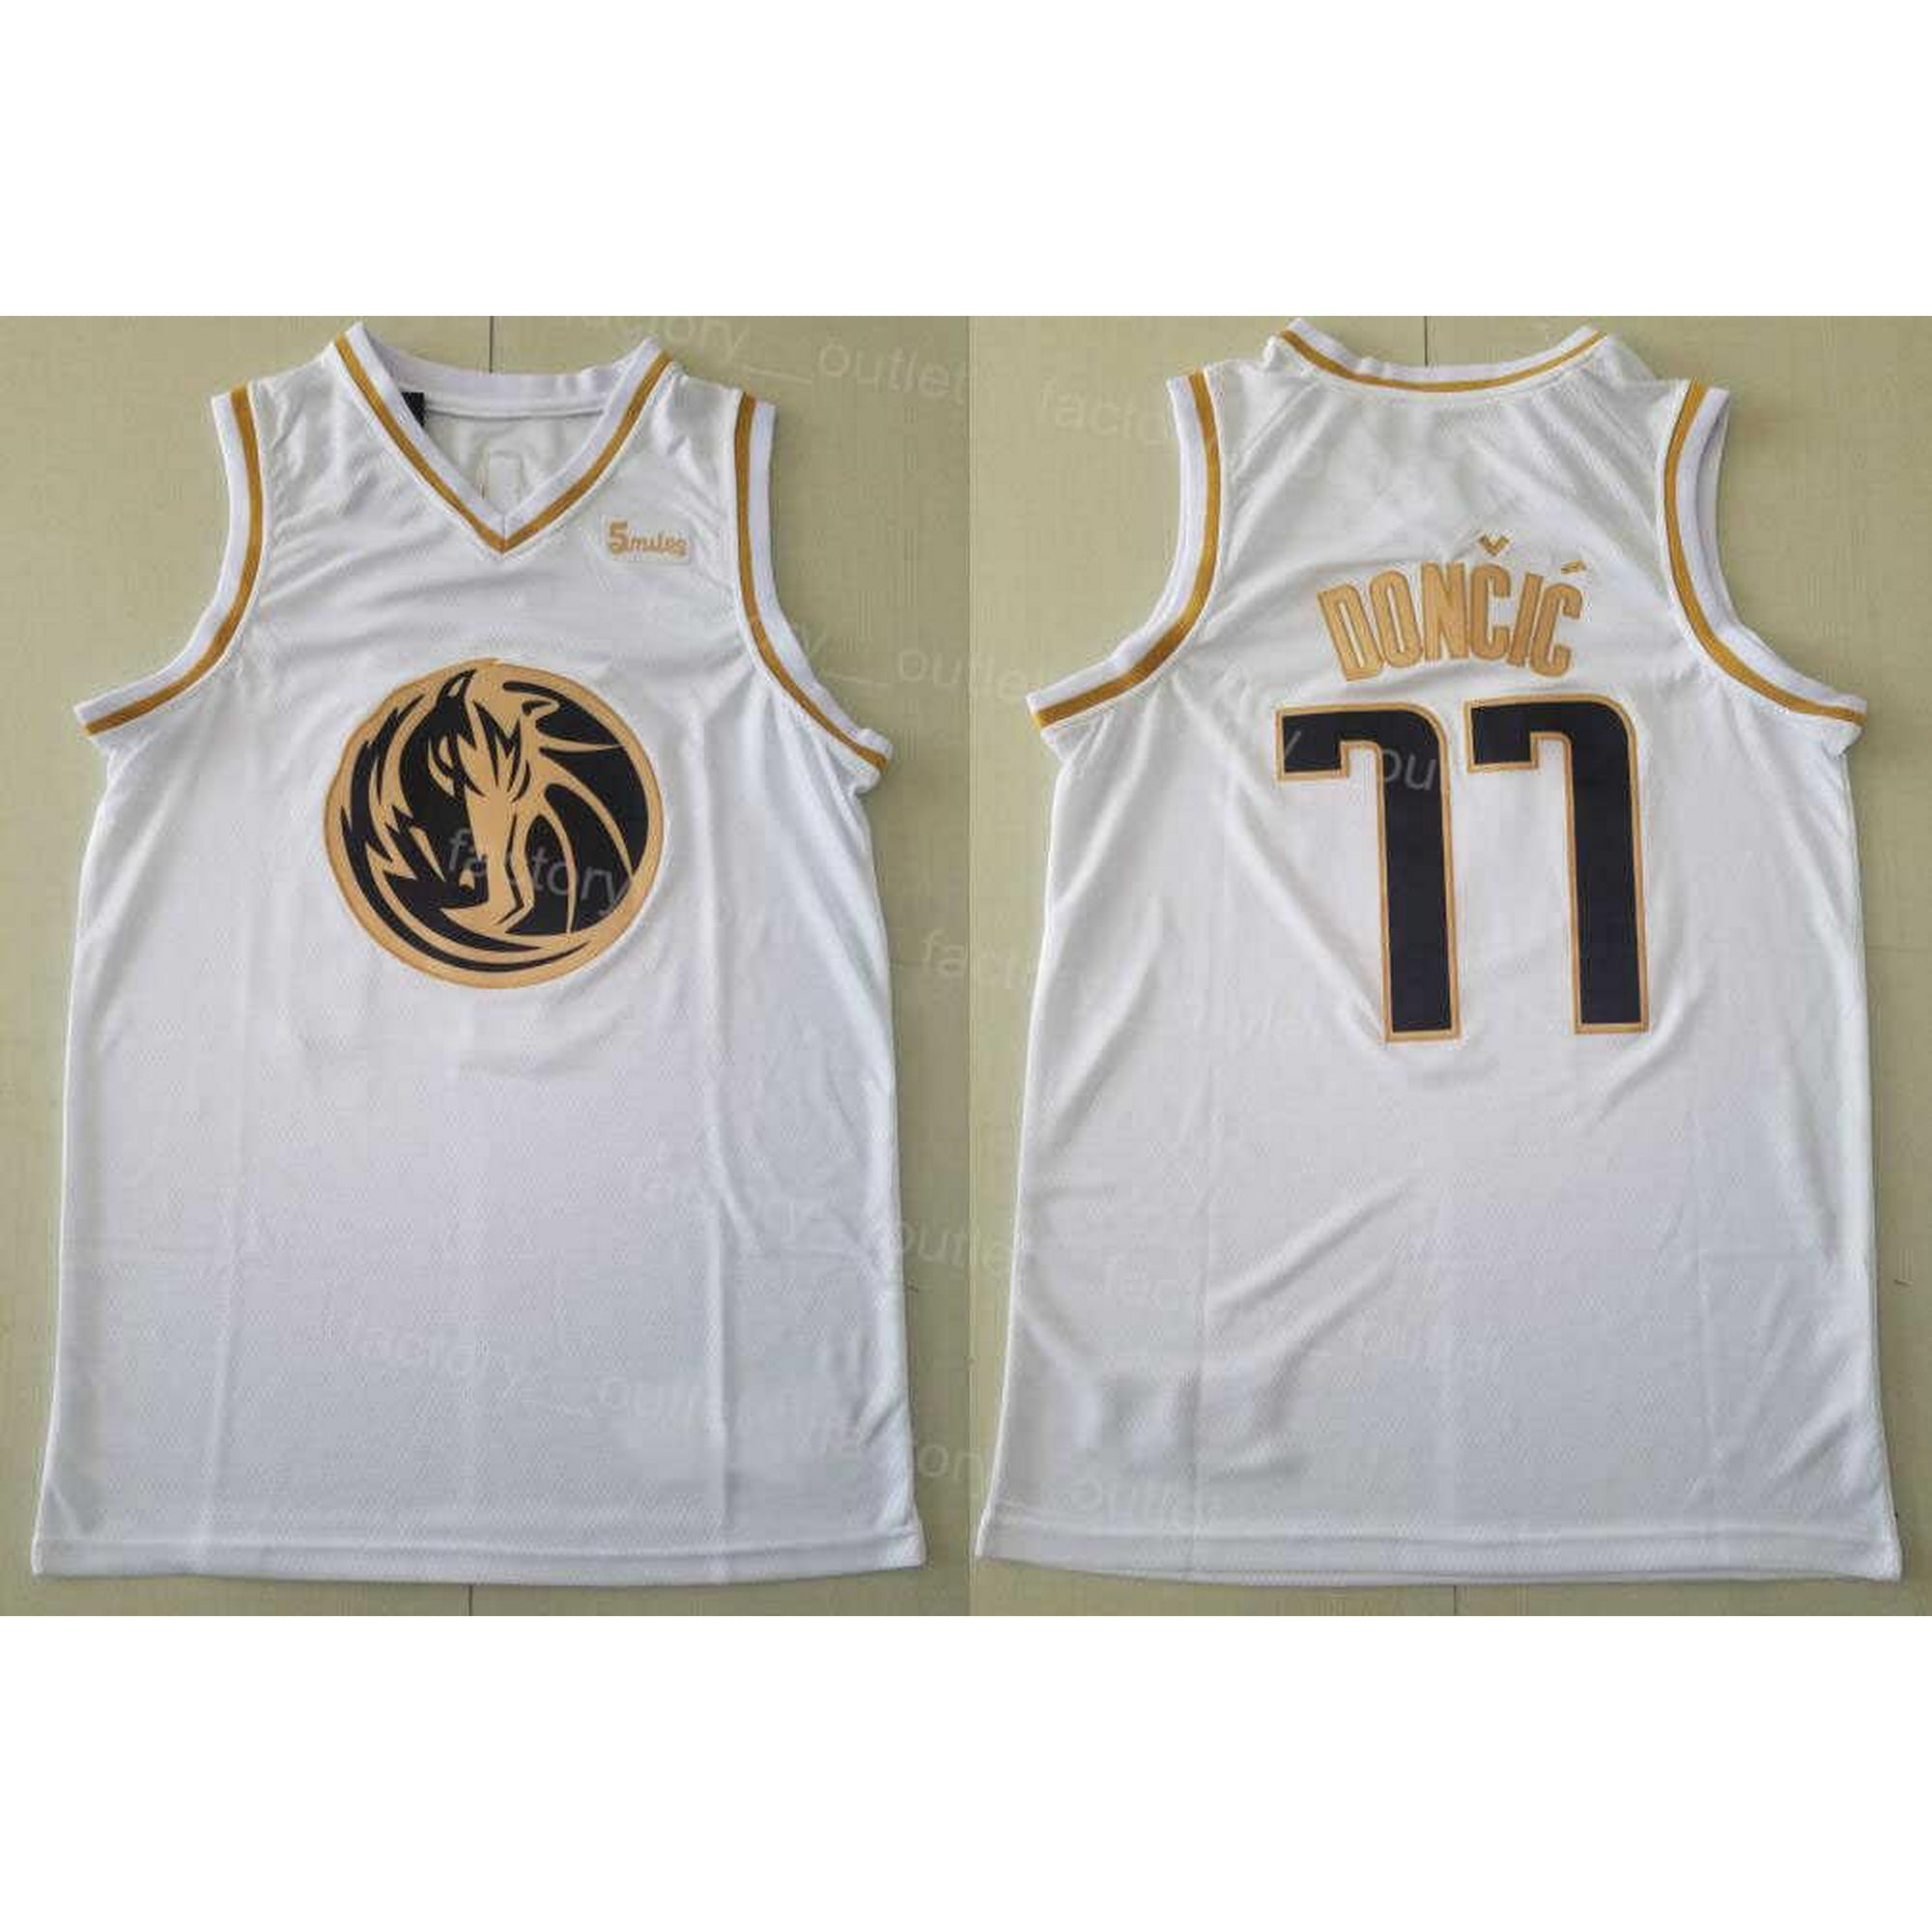 luka doncic black and gold jersey